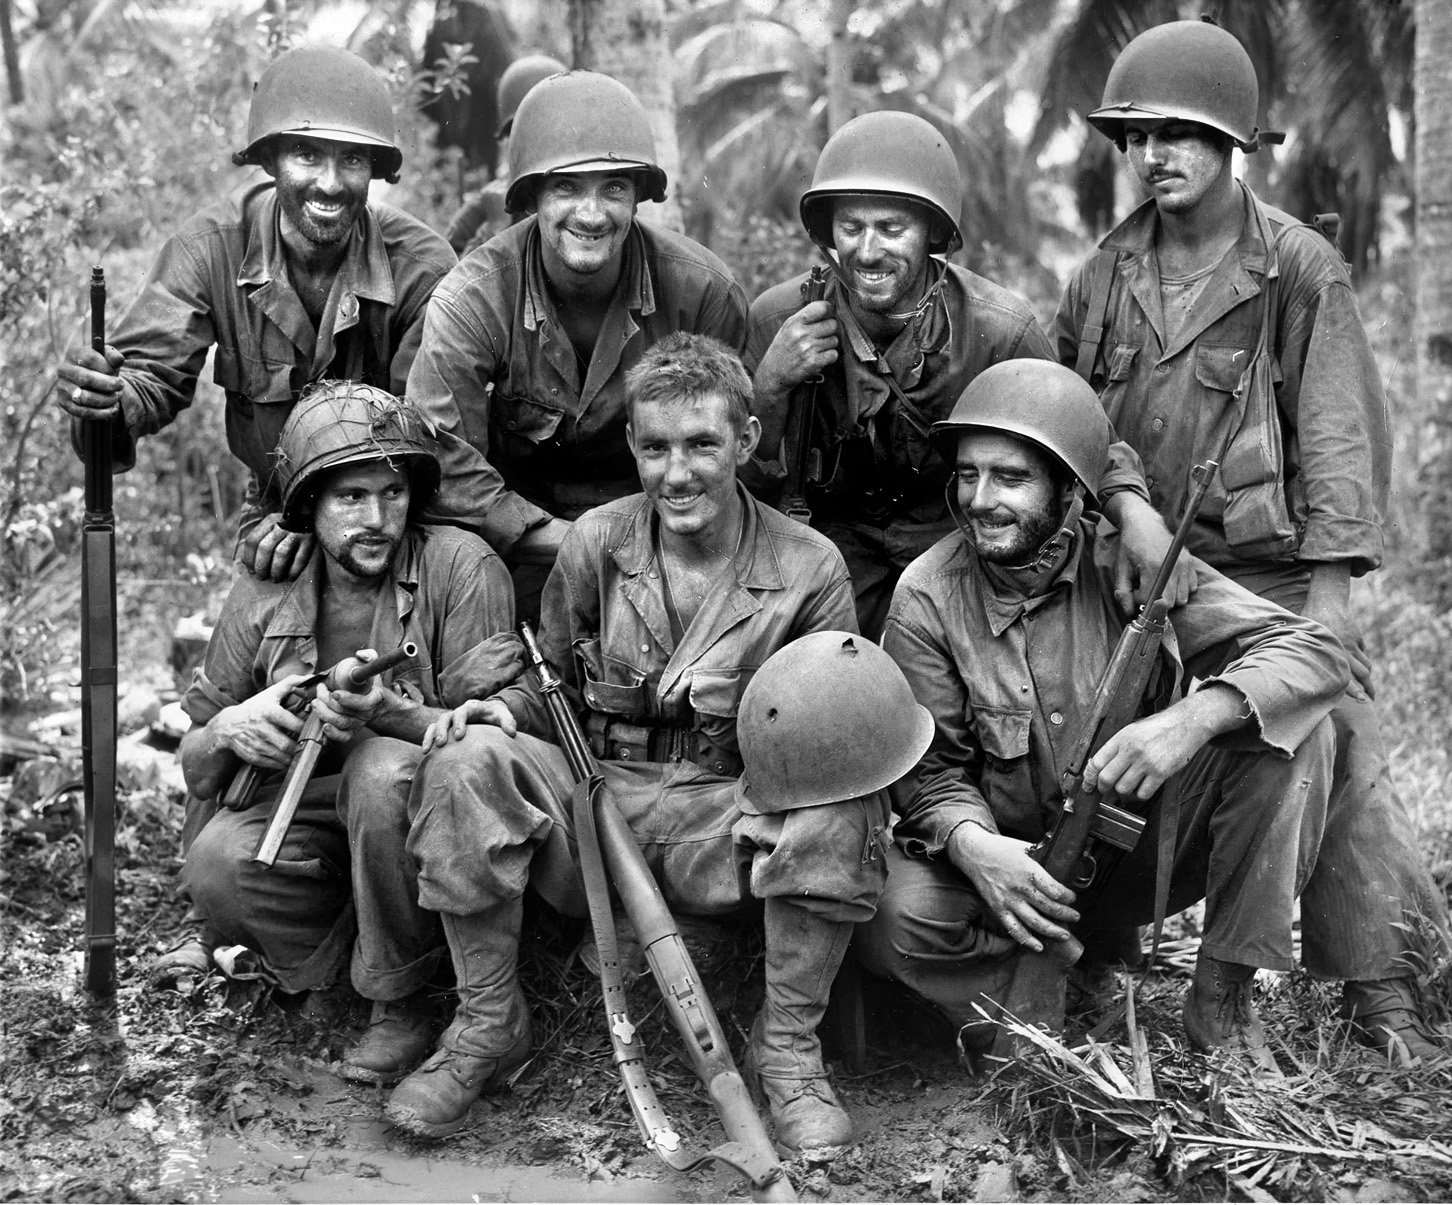 Private William N. Wade, a soldier of the 77th Division, poses at center with comrades after the battle for Barrigada. Wade was lucky to survive when his helmet was penetrated by a Japanese sniper’s bullet. 